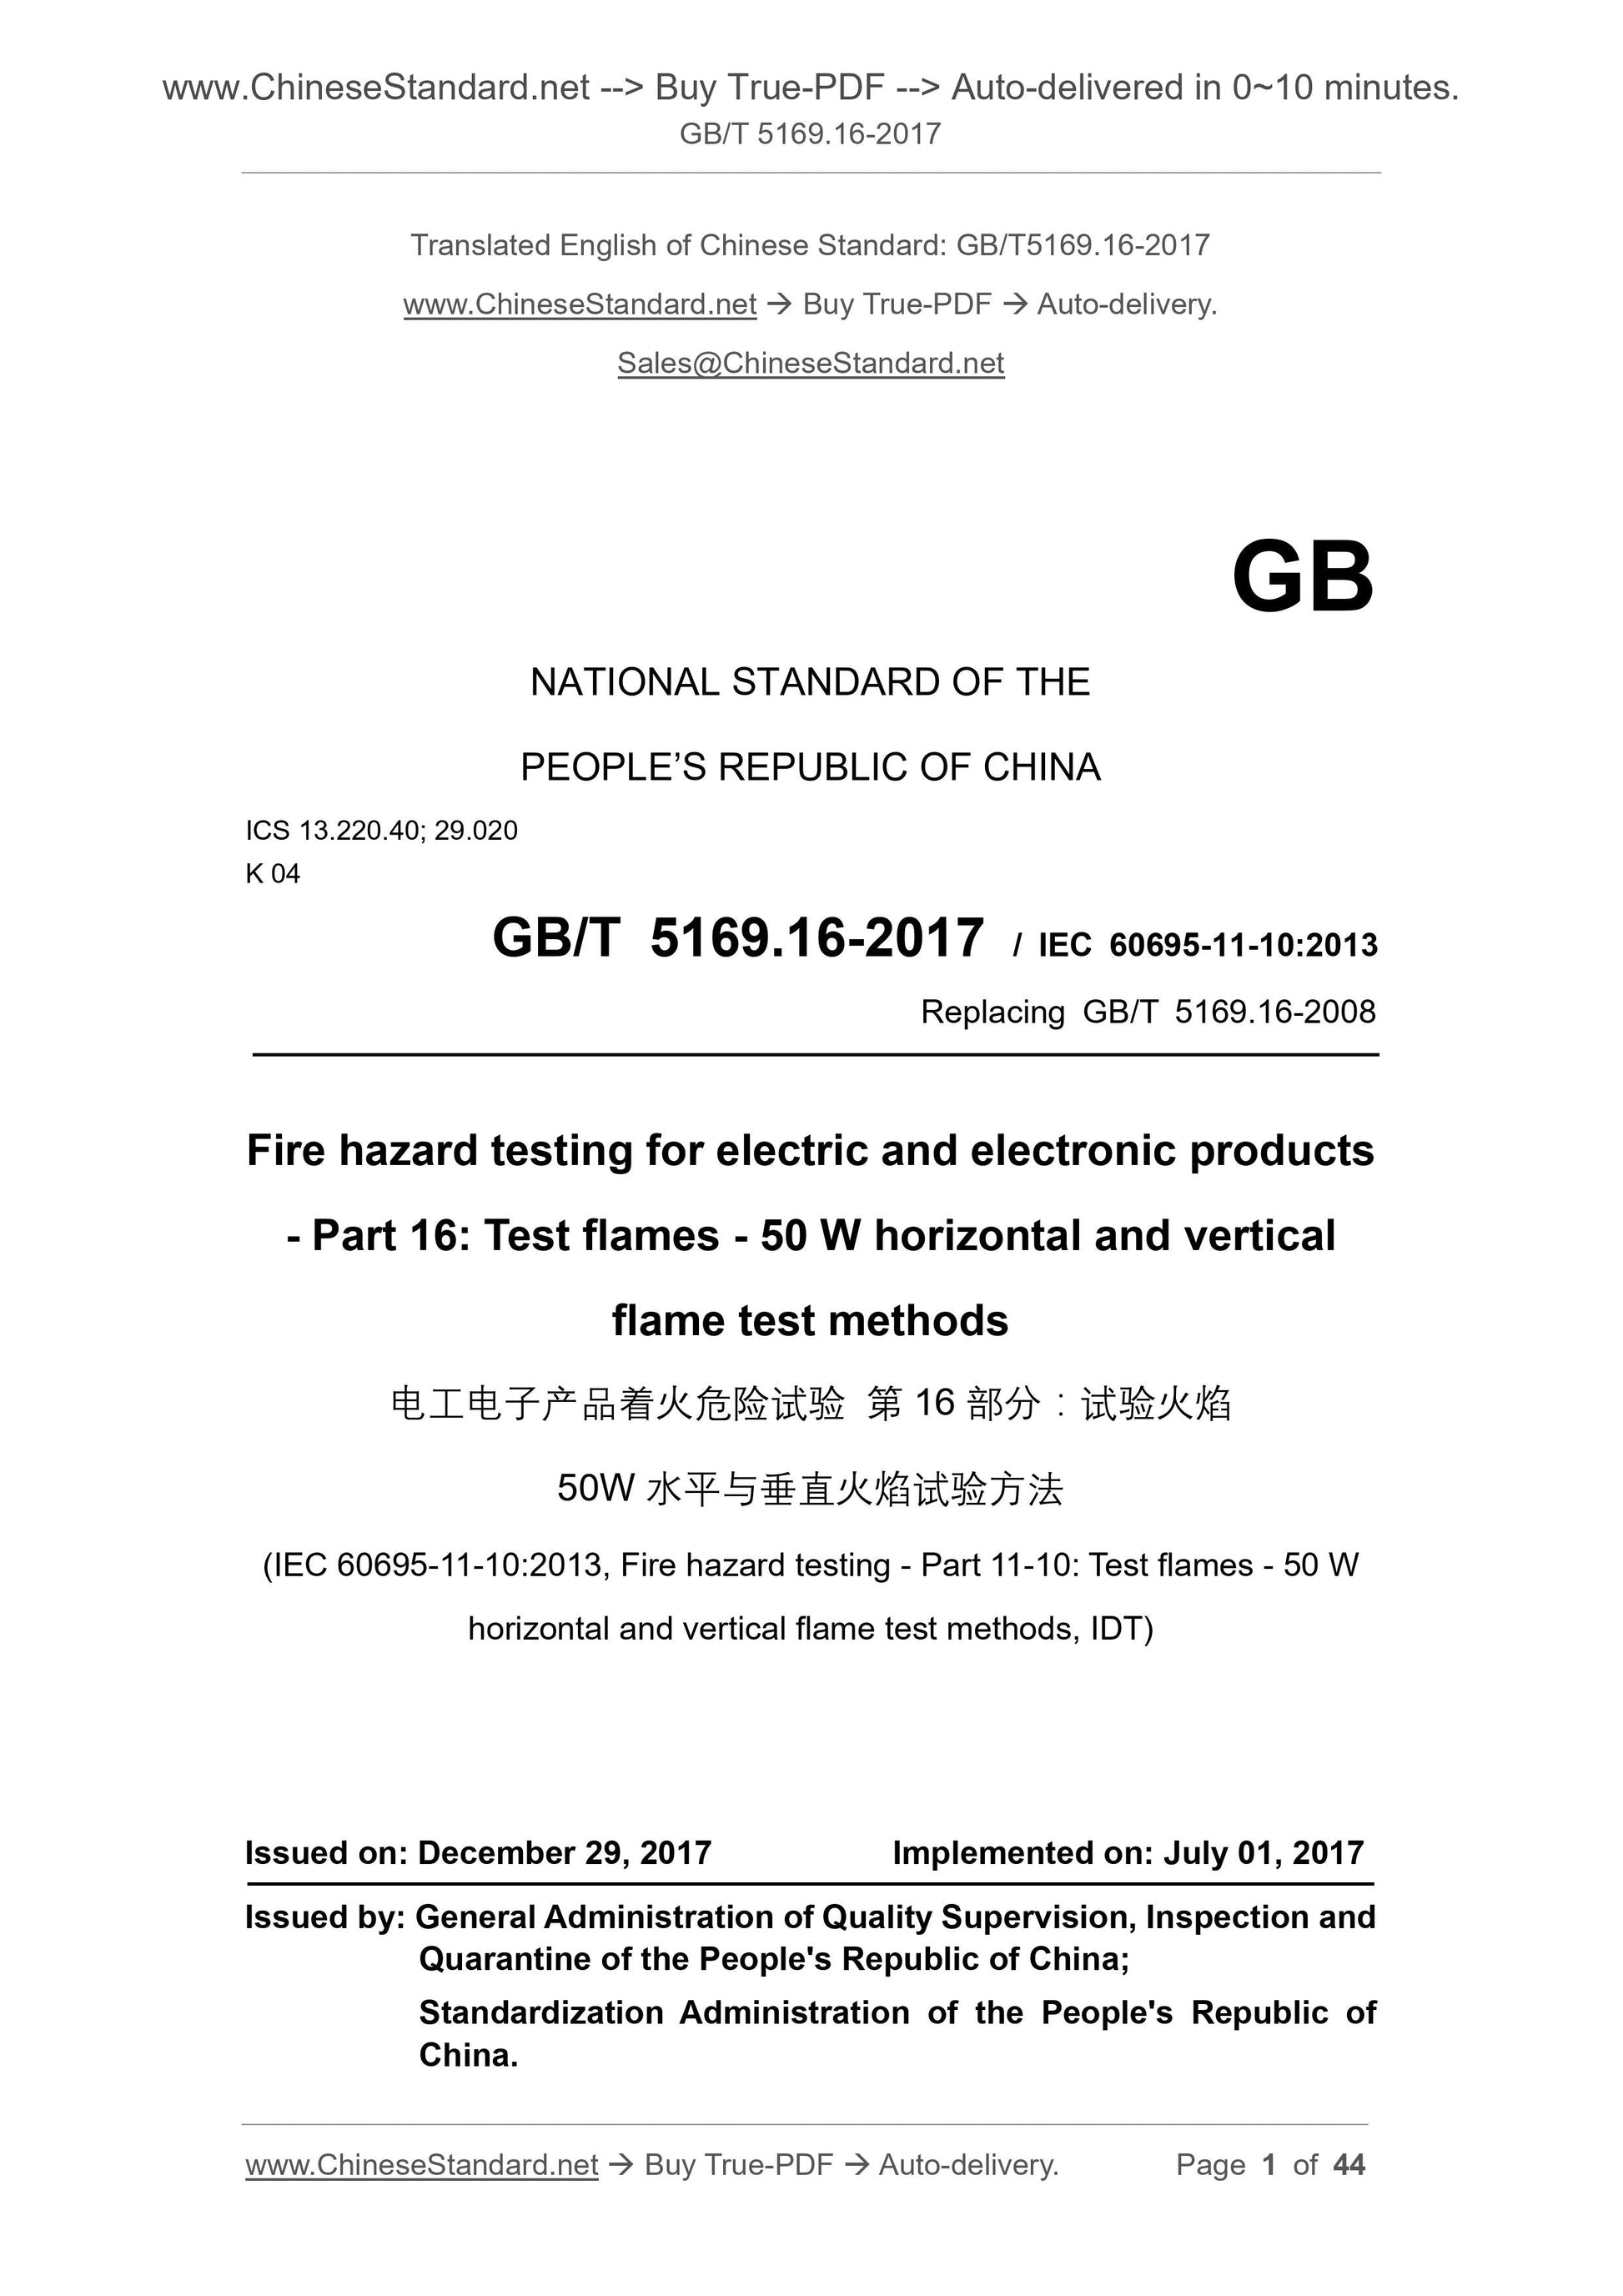 GB/T 5169.16-2017 Page 1